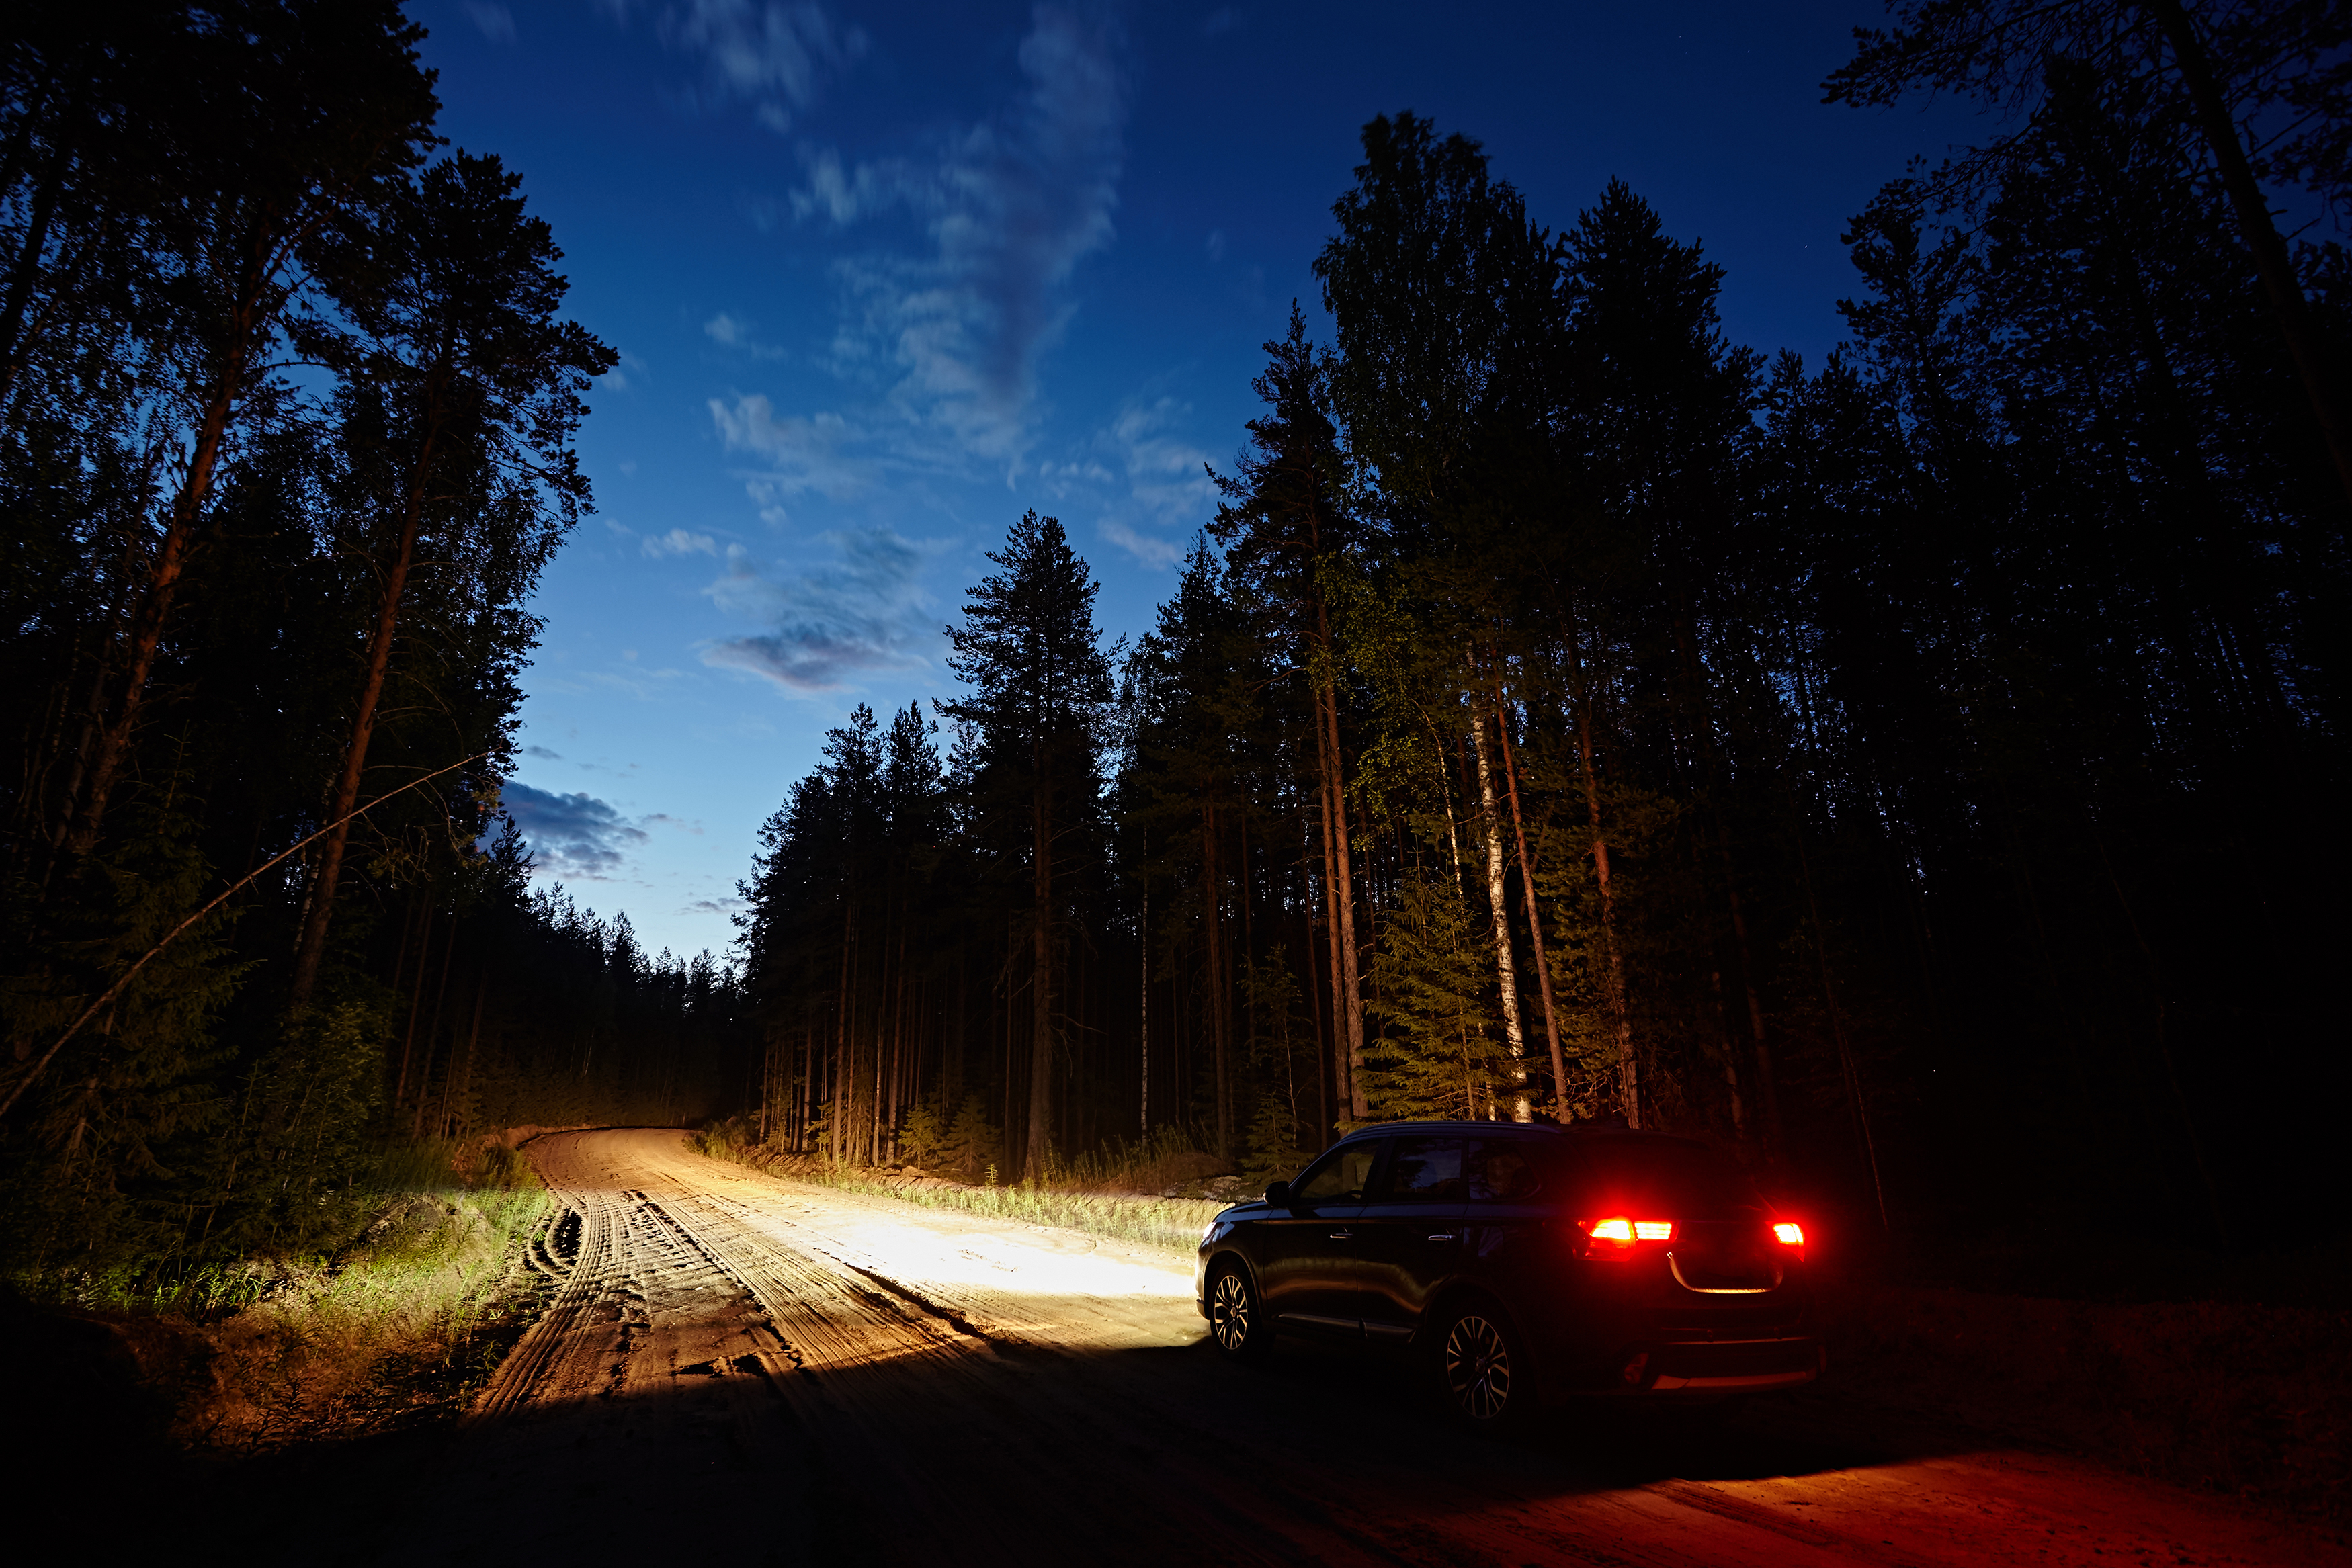 A car driving along a dirt road in the woods | Source: Shutterstock